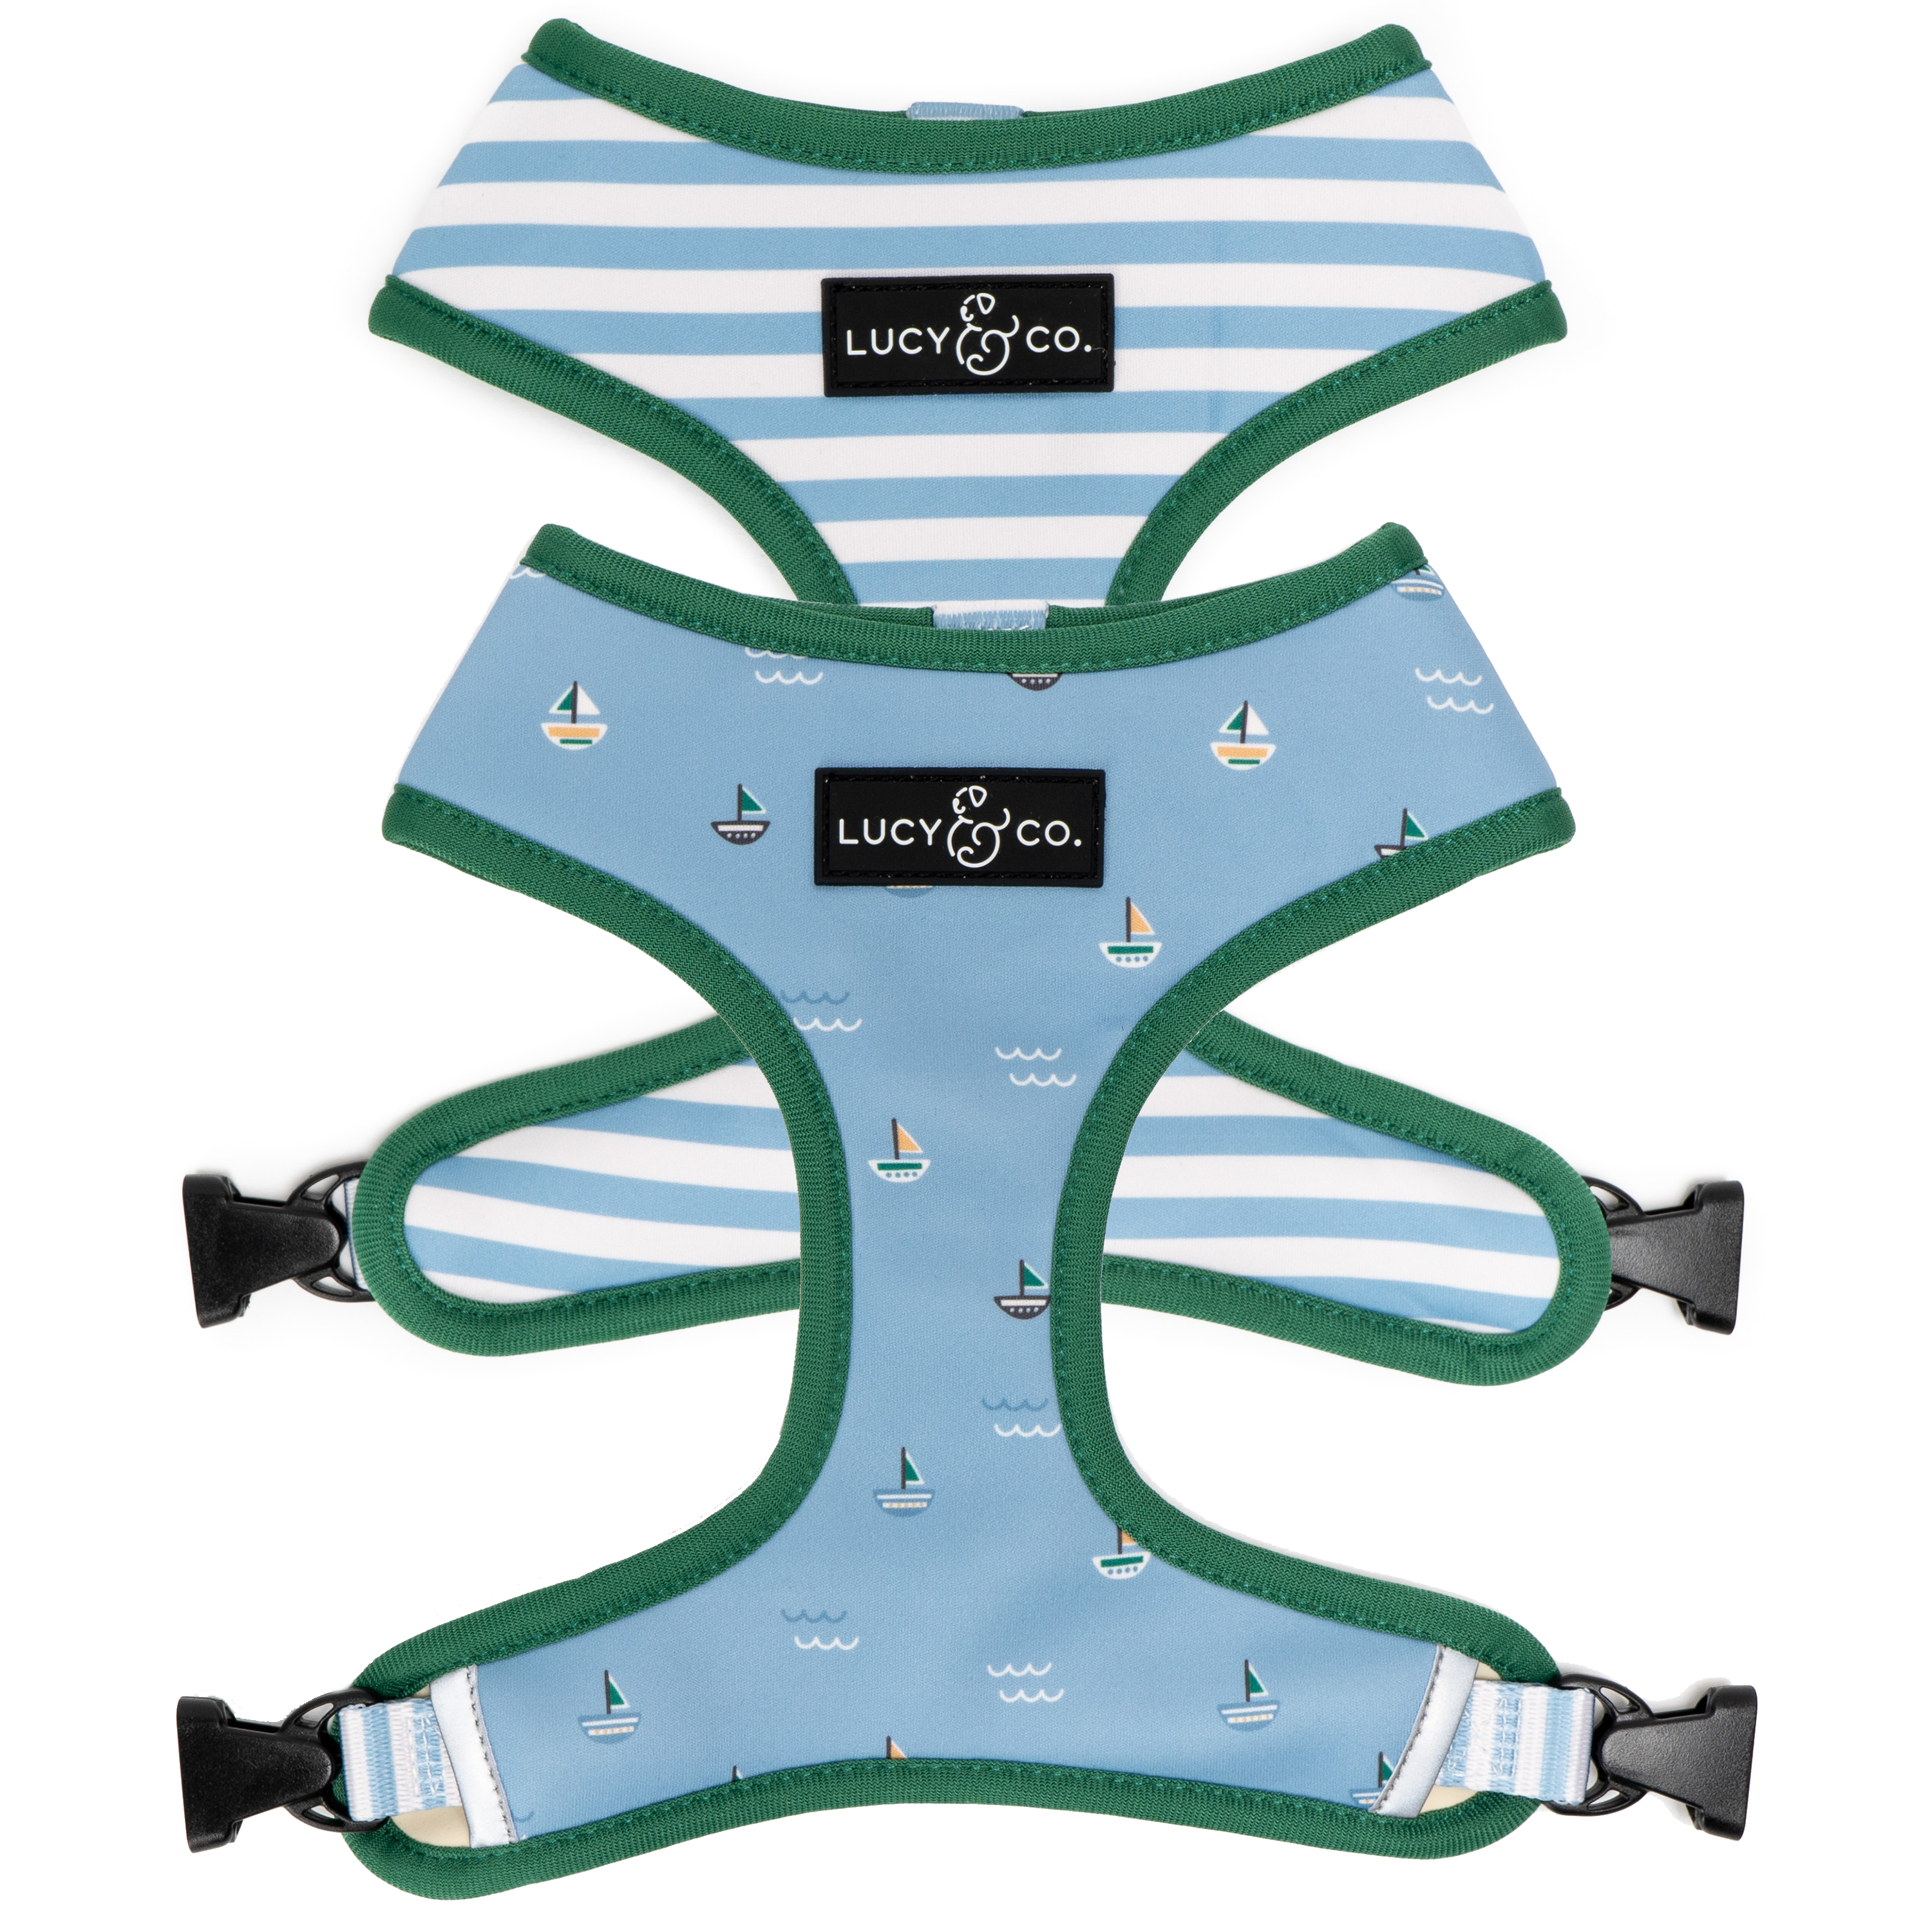 Lucy & Co. - The Set Sail Reversible Harness